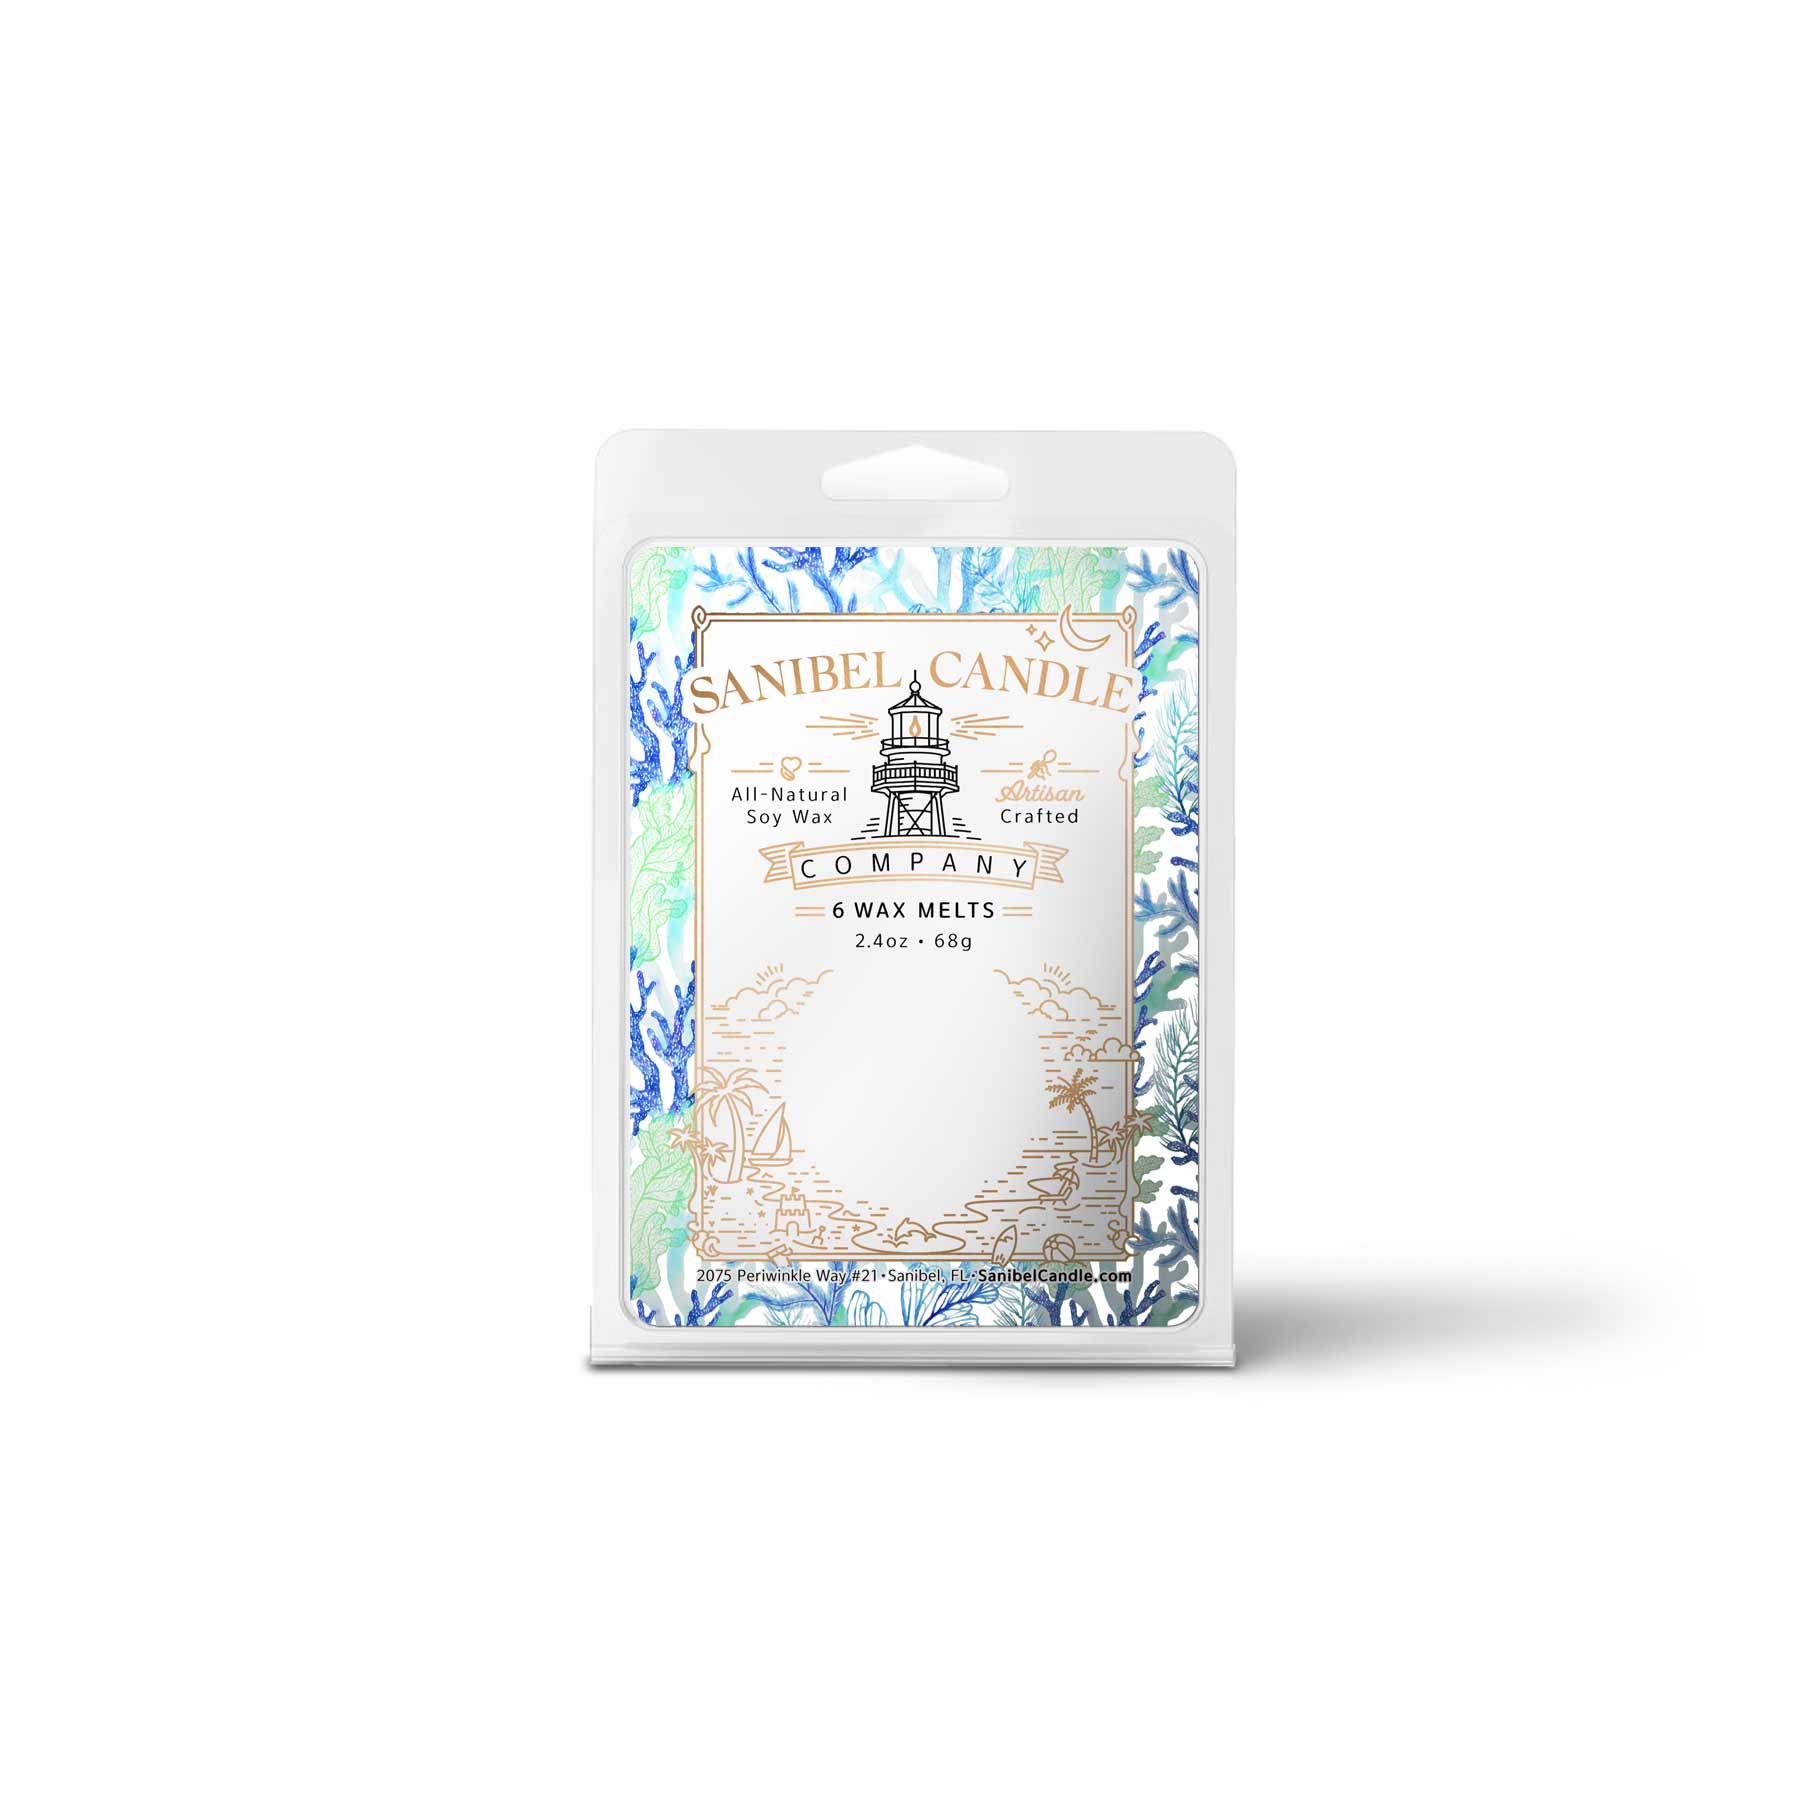 The Signature Collection Wax Melts